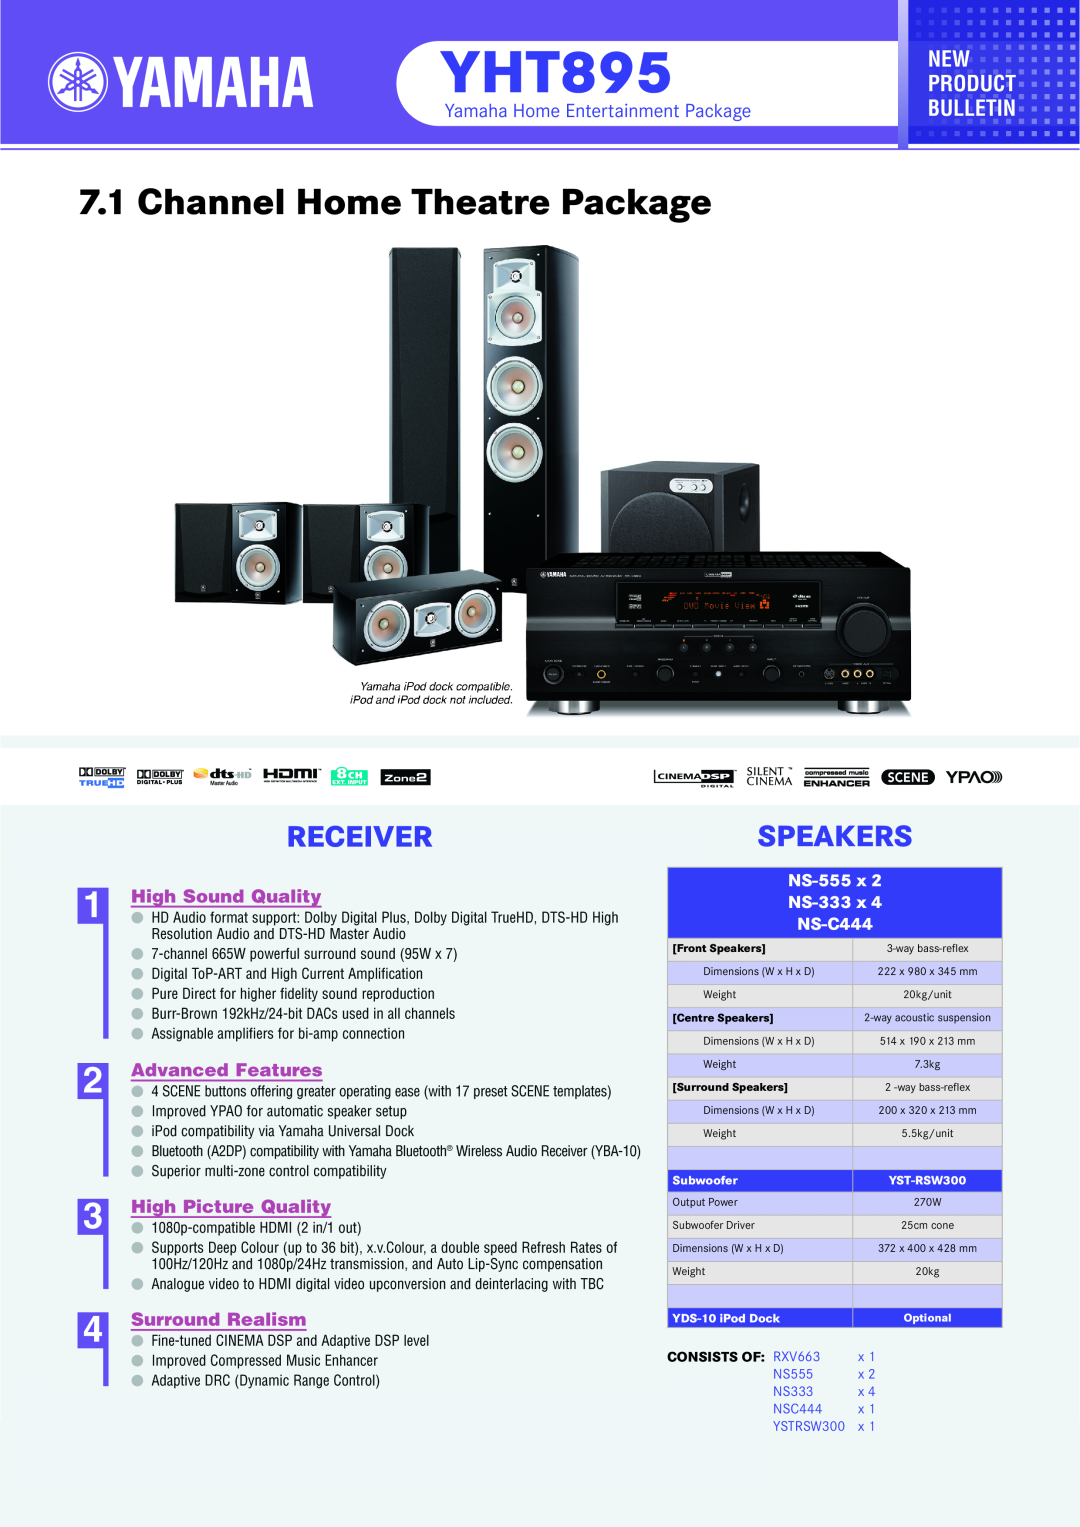 Yamaha YHT895 dimensions NS555, NS333, NSC444, Front Speakers, Centre Speakers, Surround Speakers, Receiverspeakers 